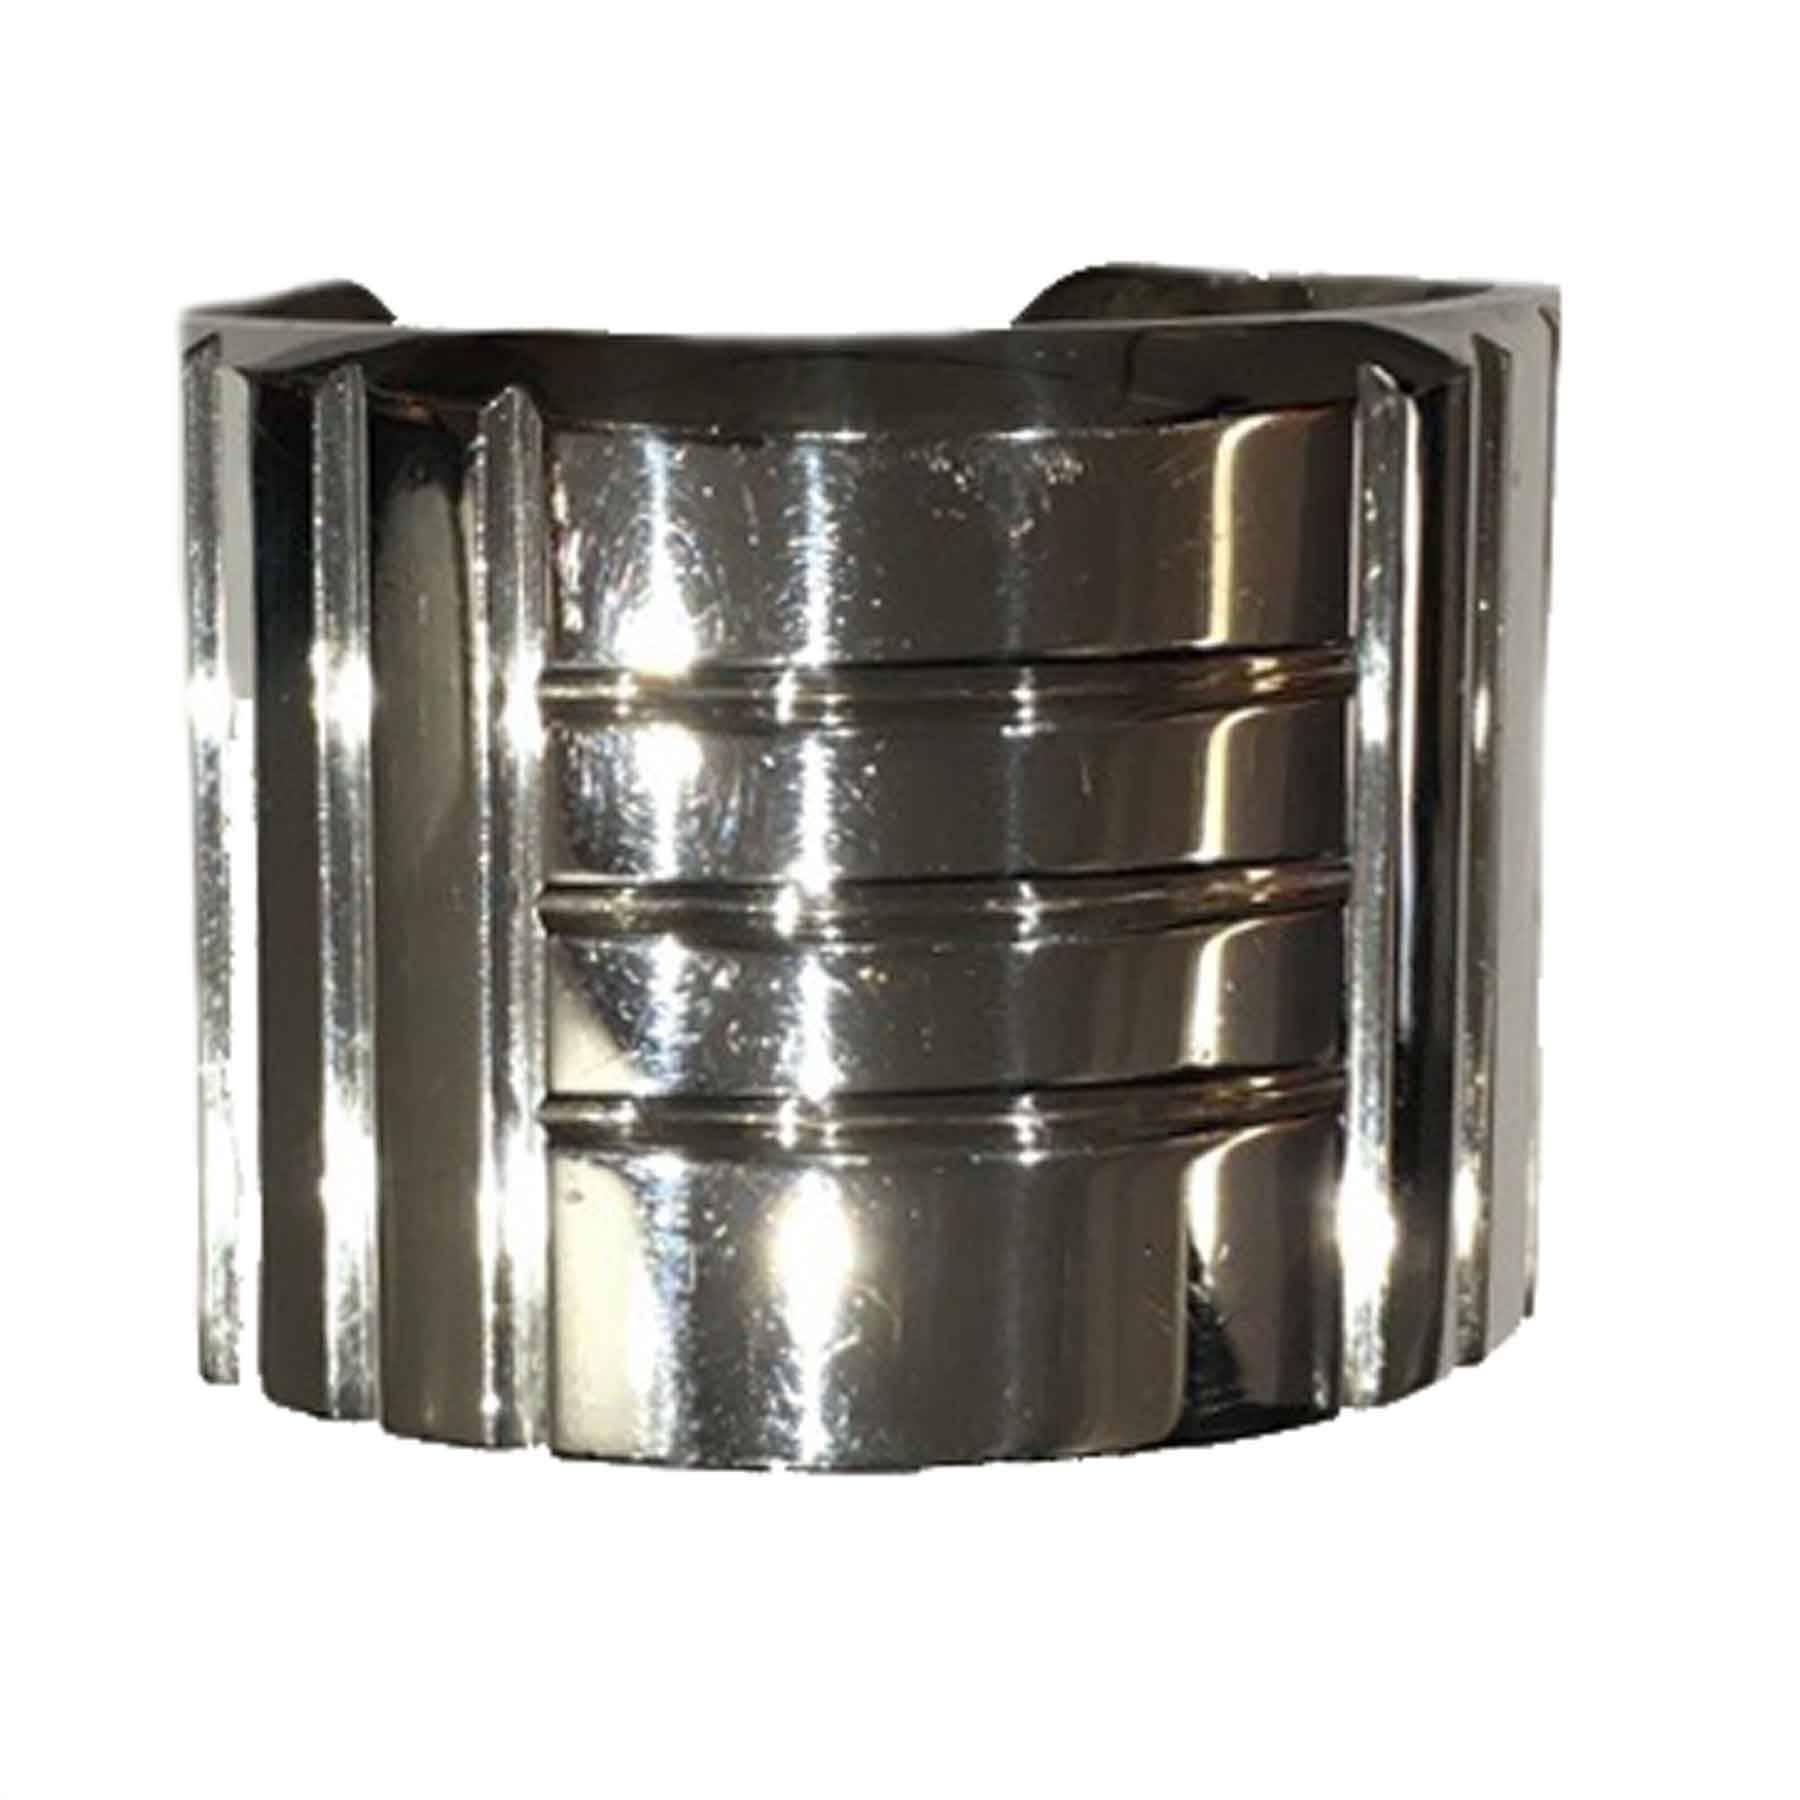  HERMES 'Kellylock' cuff bracelet in sterling silver, size S. Made in Italy.

Sterling silver: 162.7 grams.

Delivered in a Valois Vintage Paris dustbag